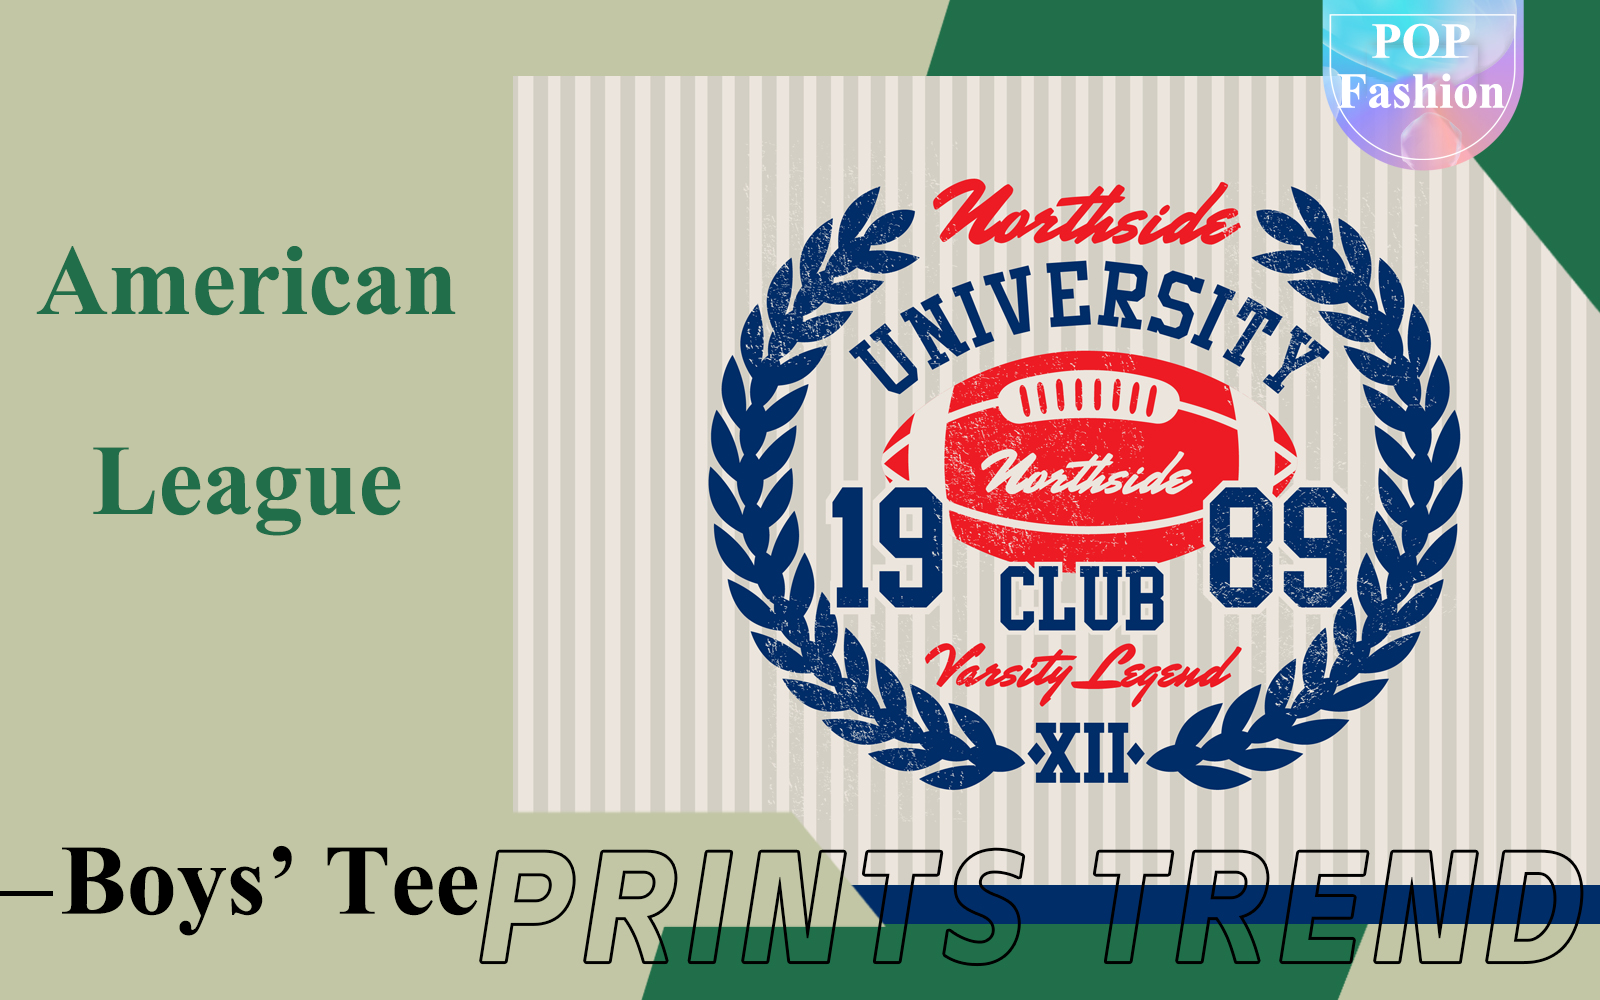 American League -- The Pattern Trend for Boys' Tee